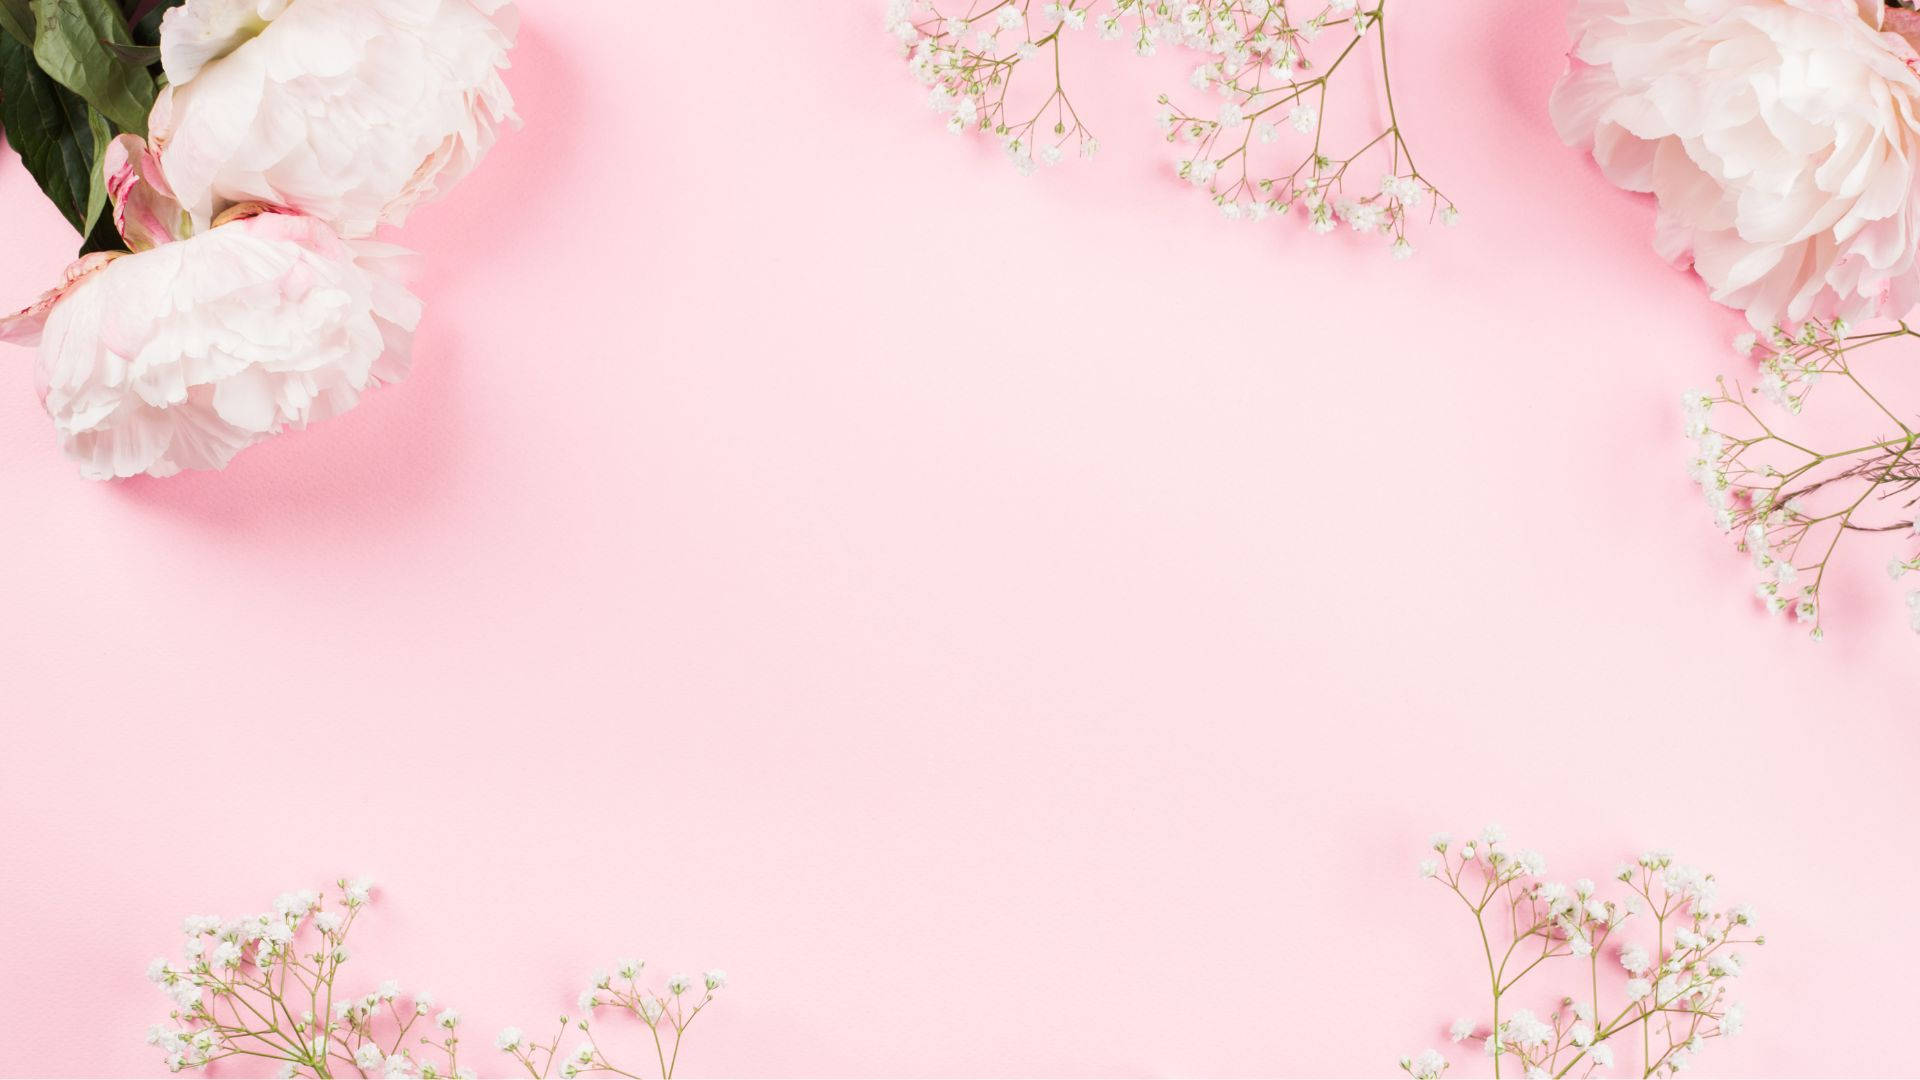 Download Flowers Flat Lay In Baby Pink Theme Wallpaper 